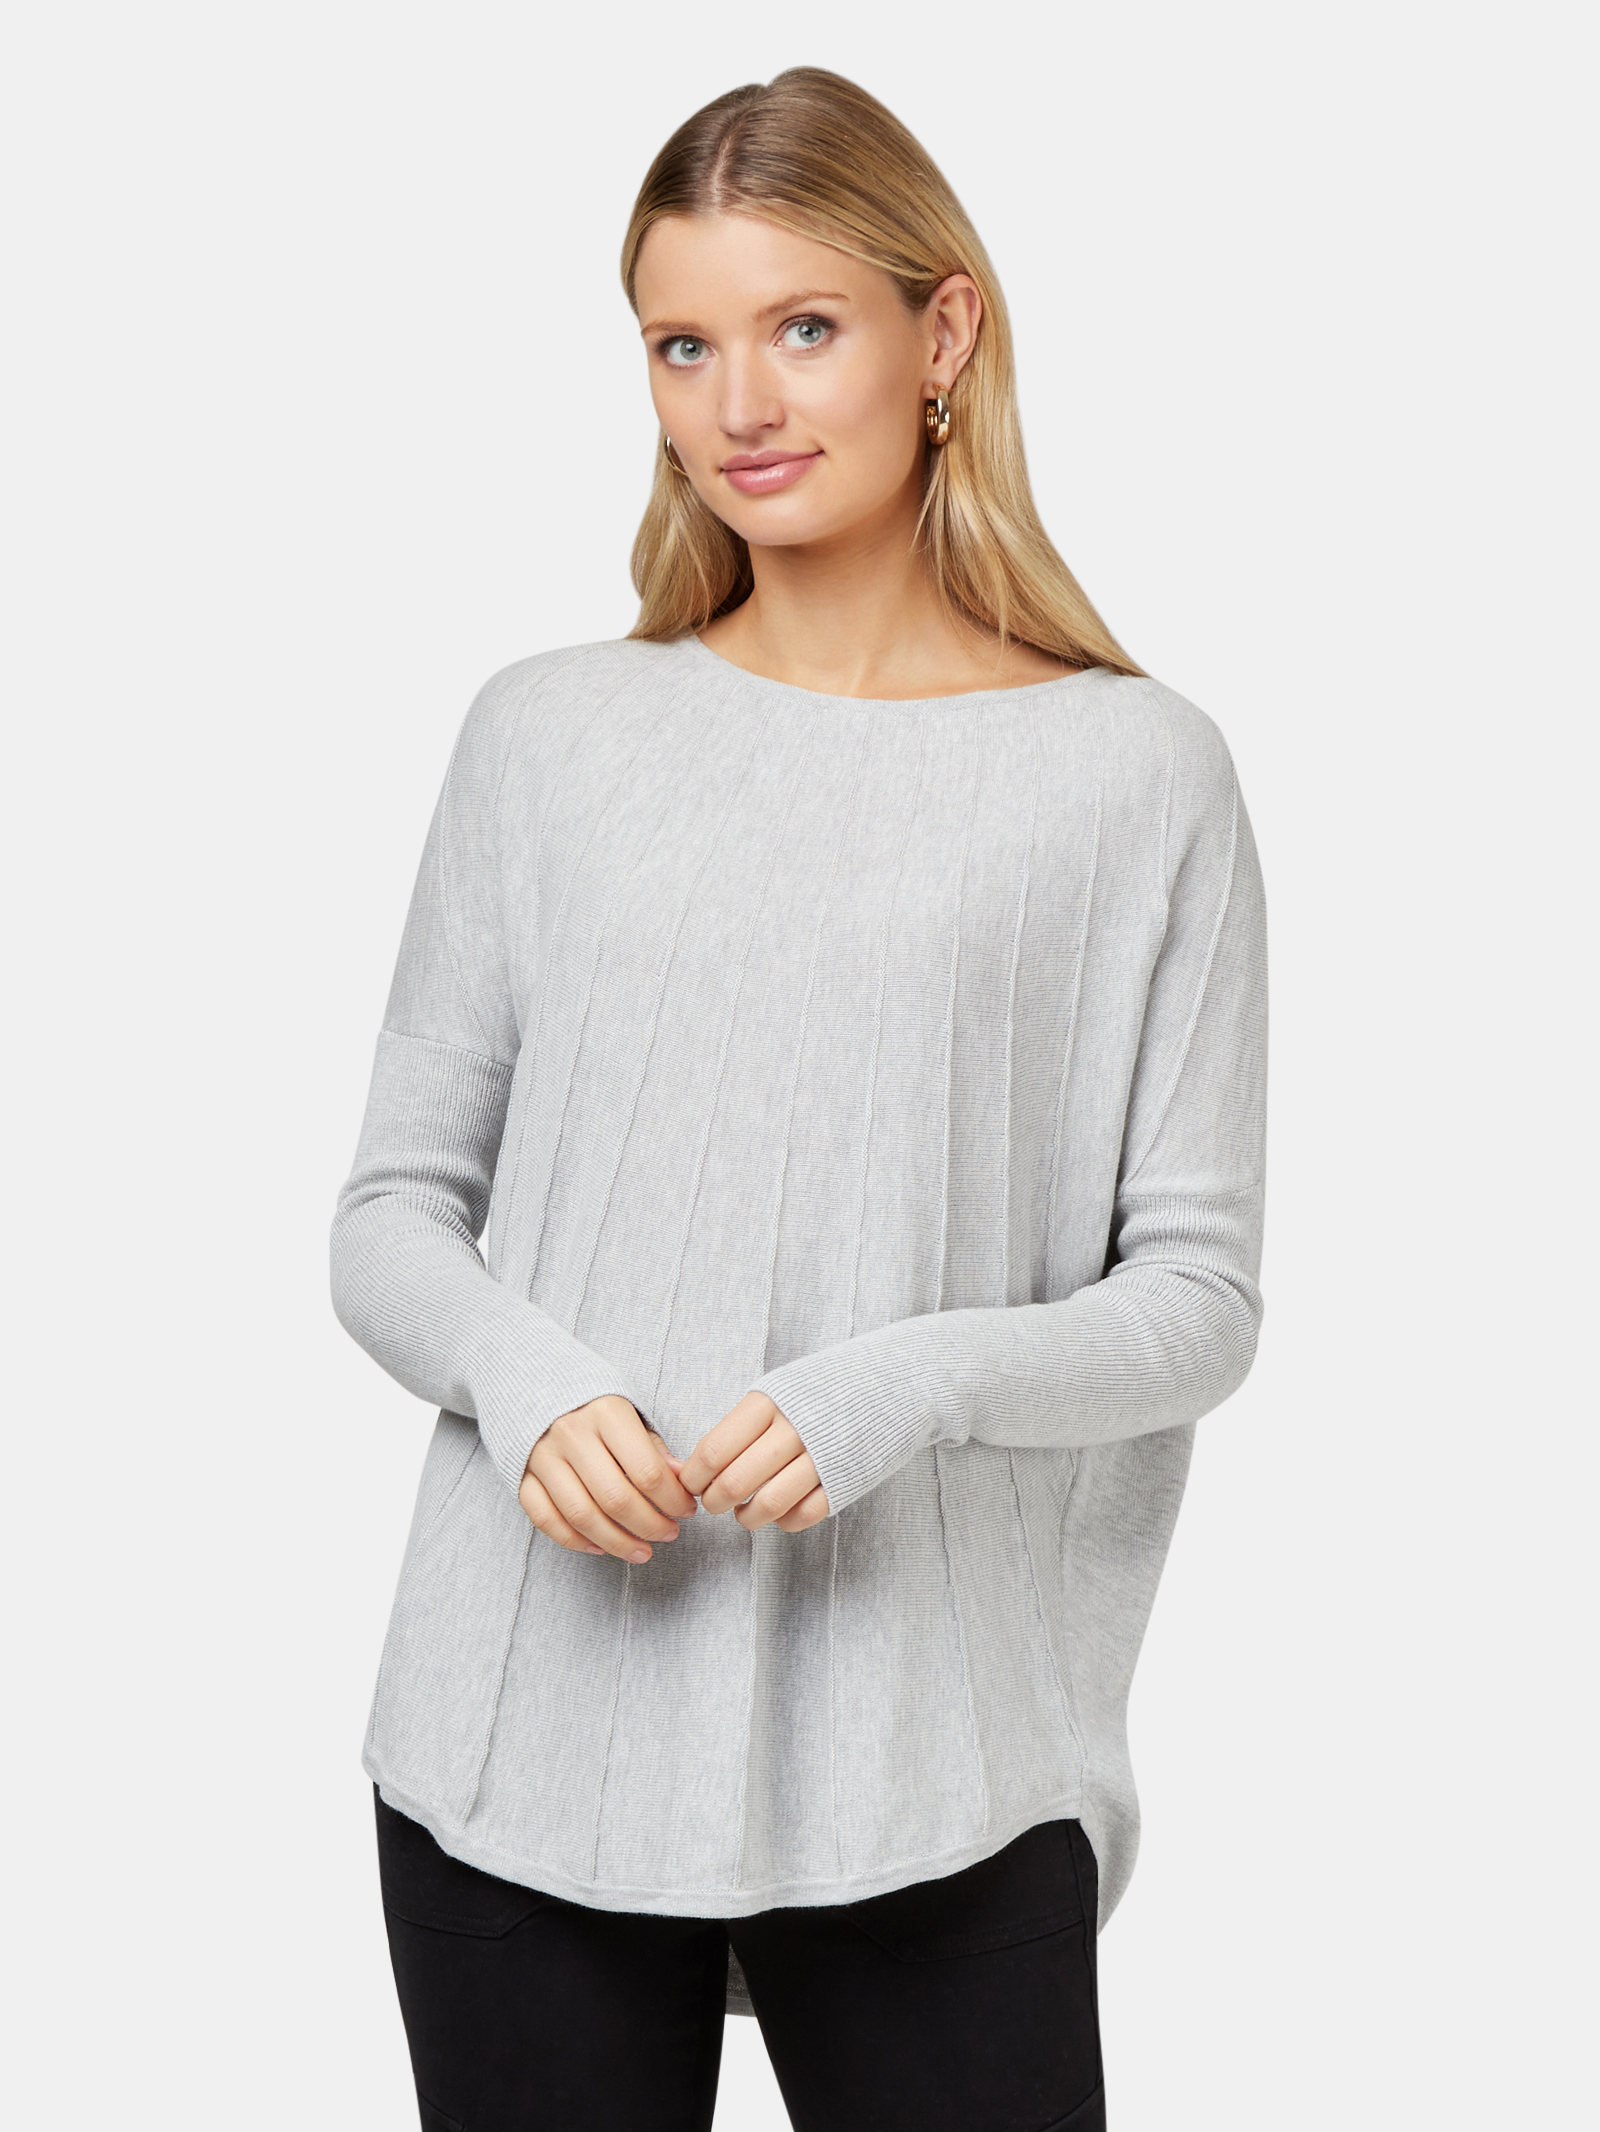 Mia Swing Pullover | Jeanswest